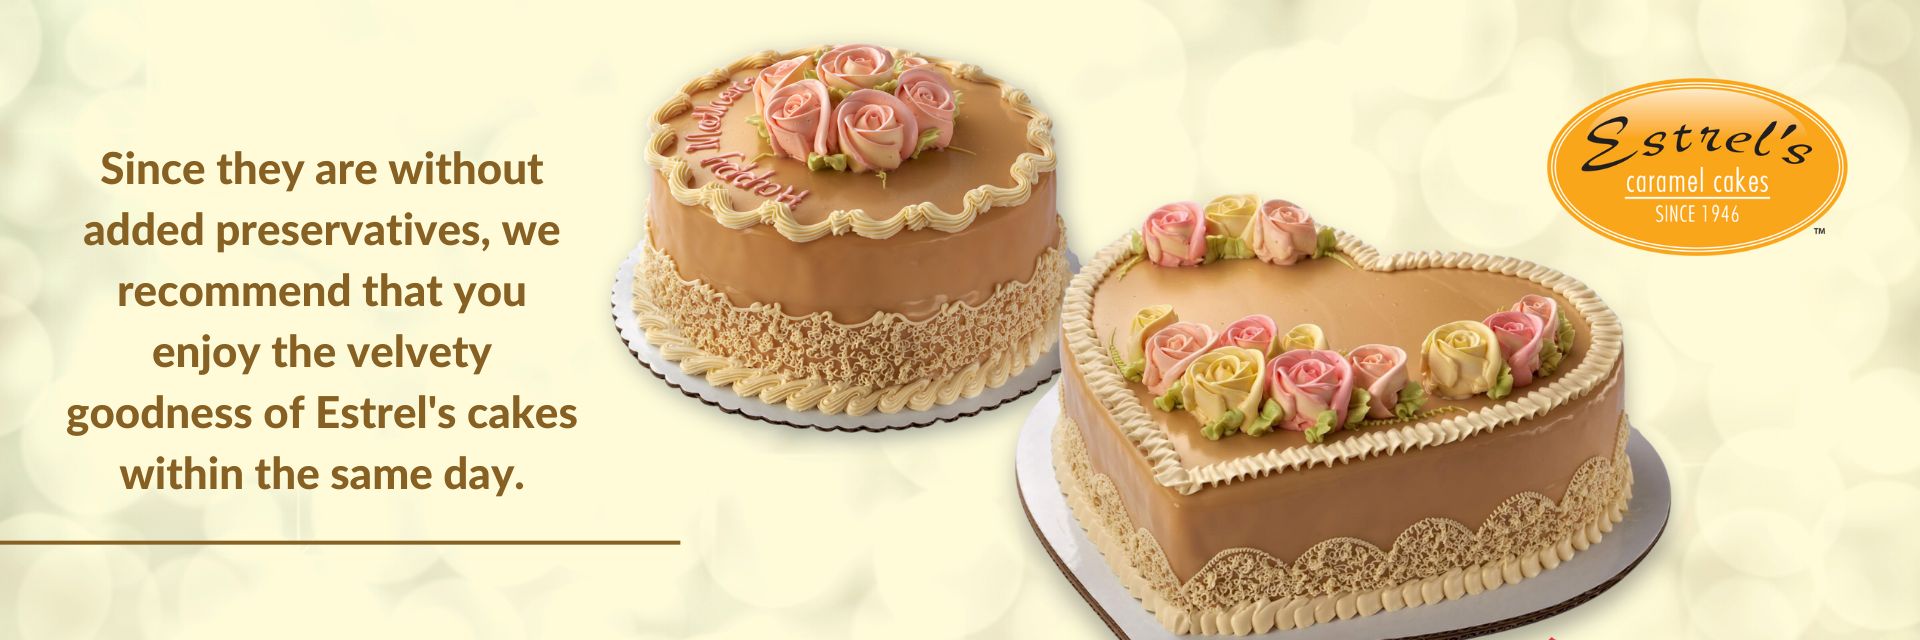 Estrel's Caramel Cakes - Round and Heart caramel cakes with filling, roses design